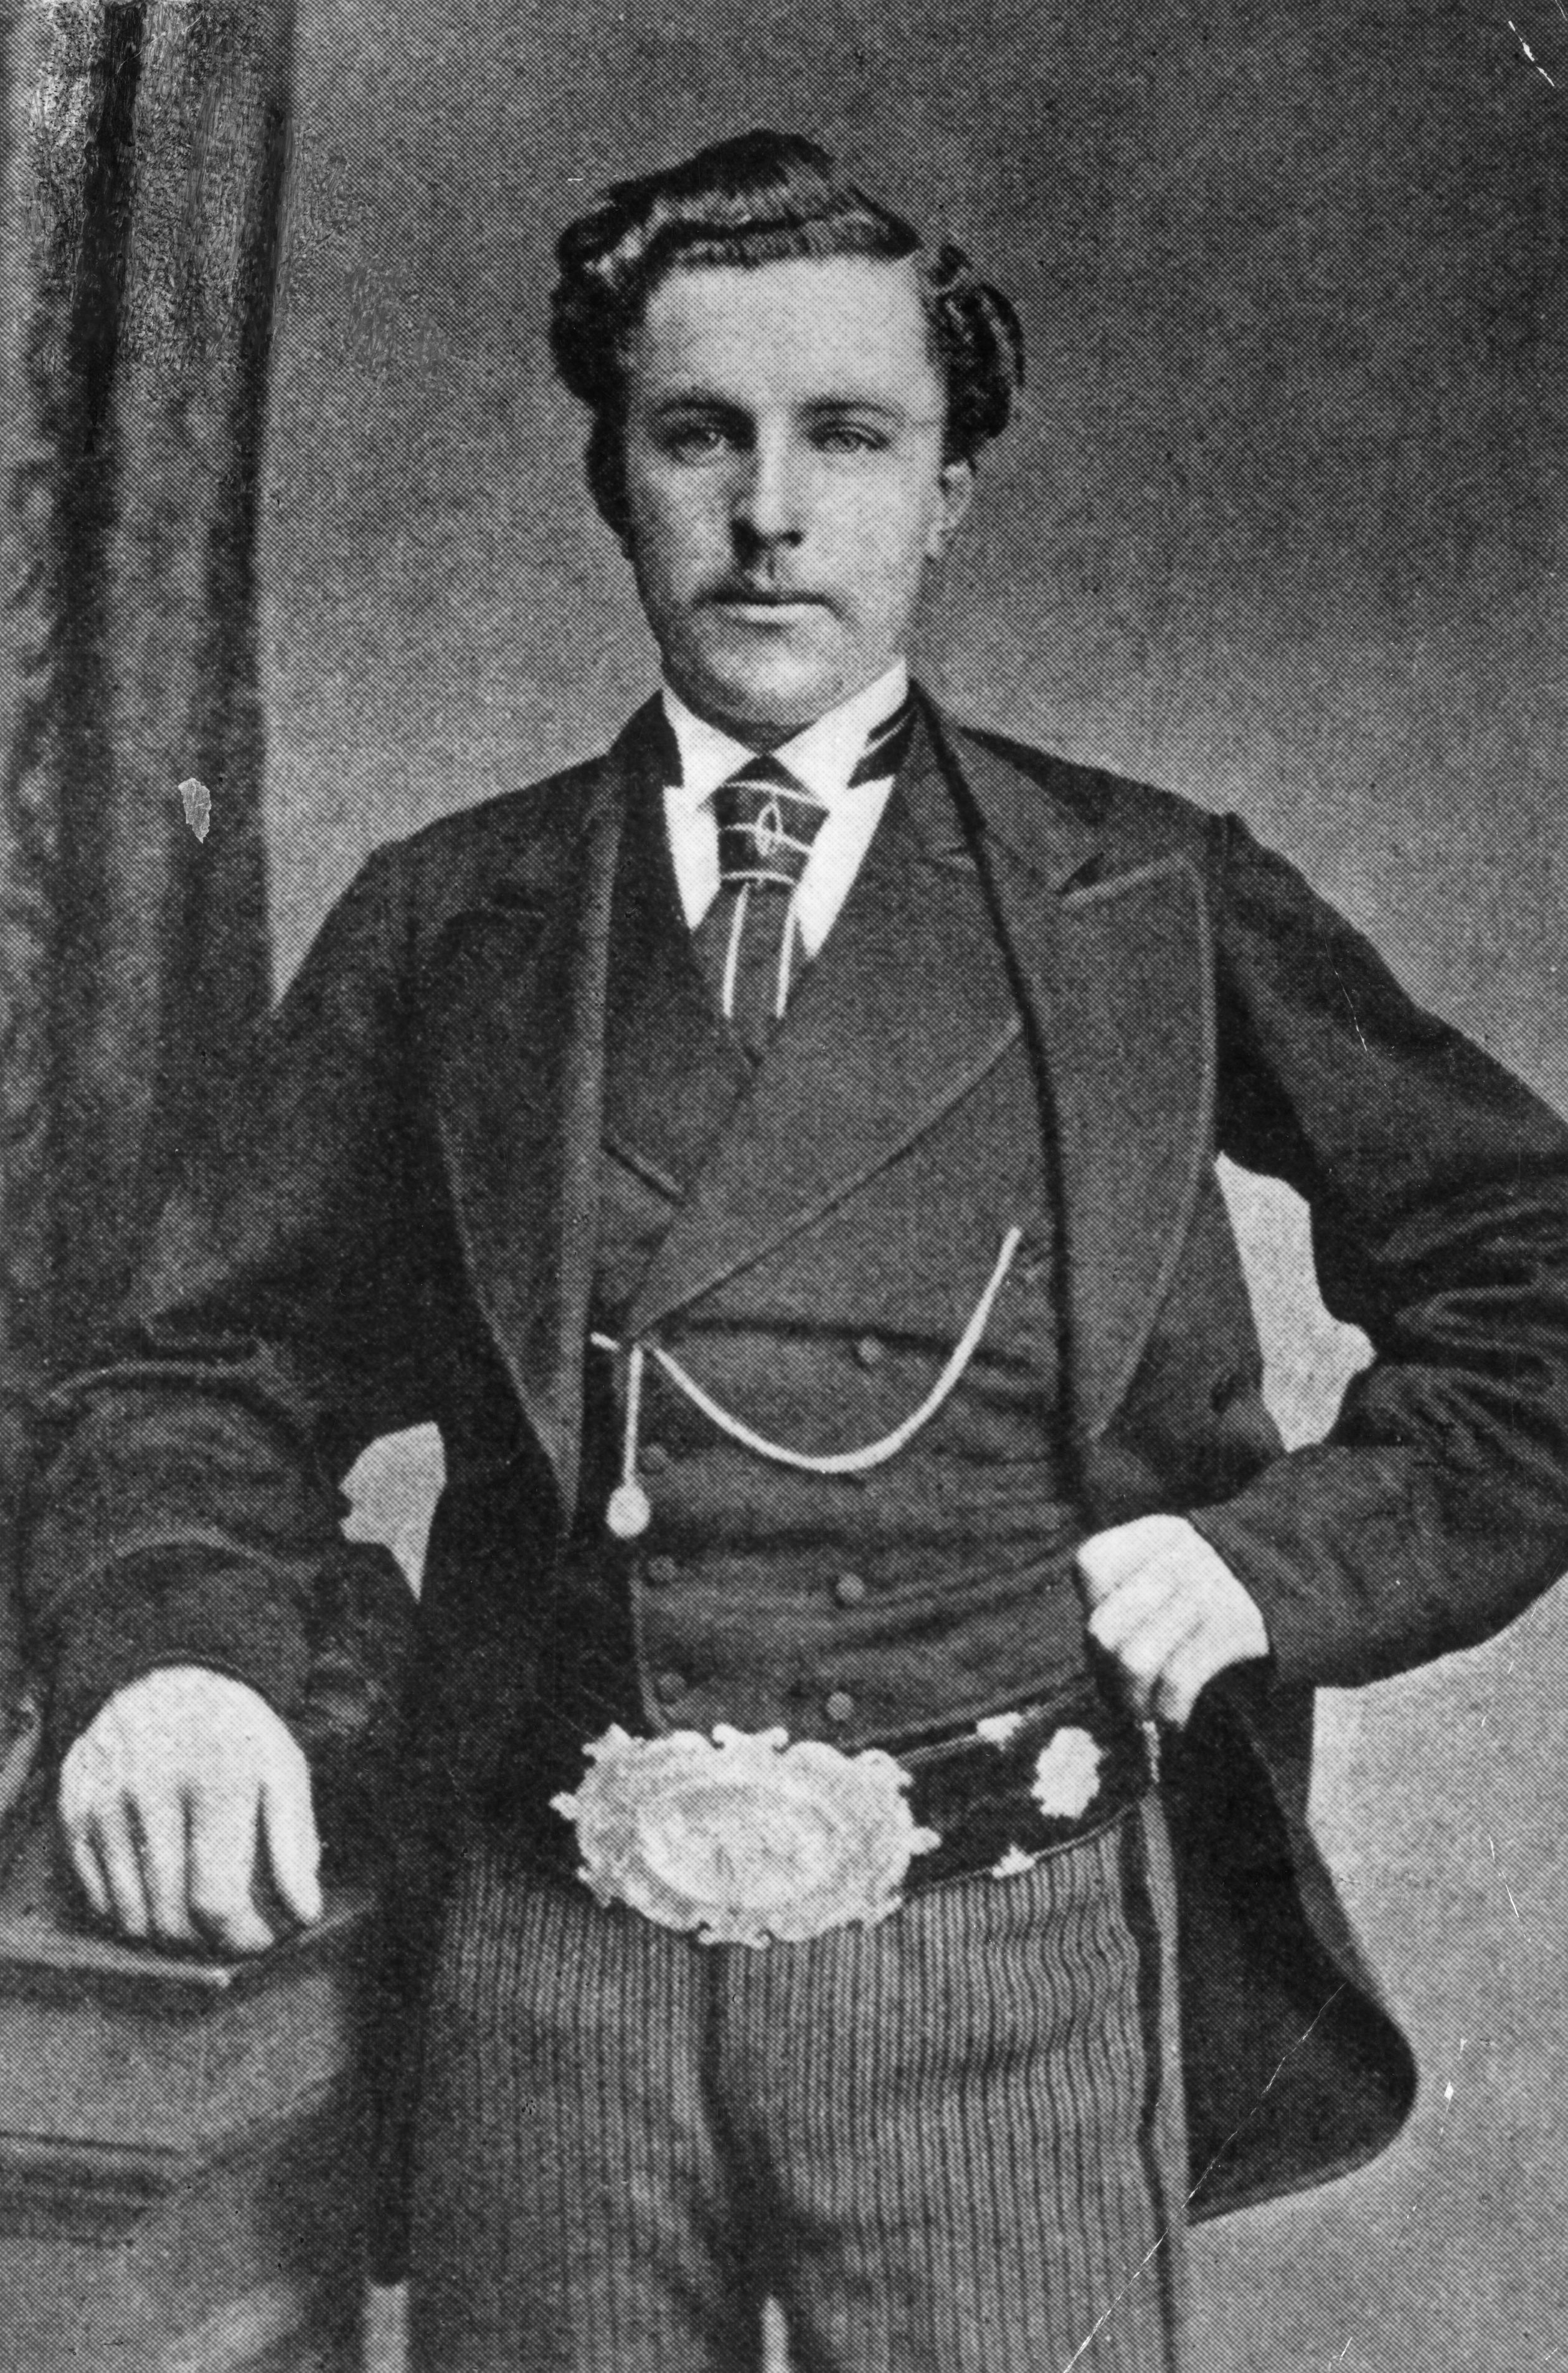 Young Tom Morris with the Challenge Belt before the Claret Jug was awarded in 1873. (Hulton Archive/Getty Images).